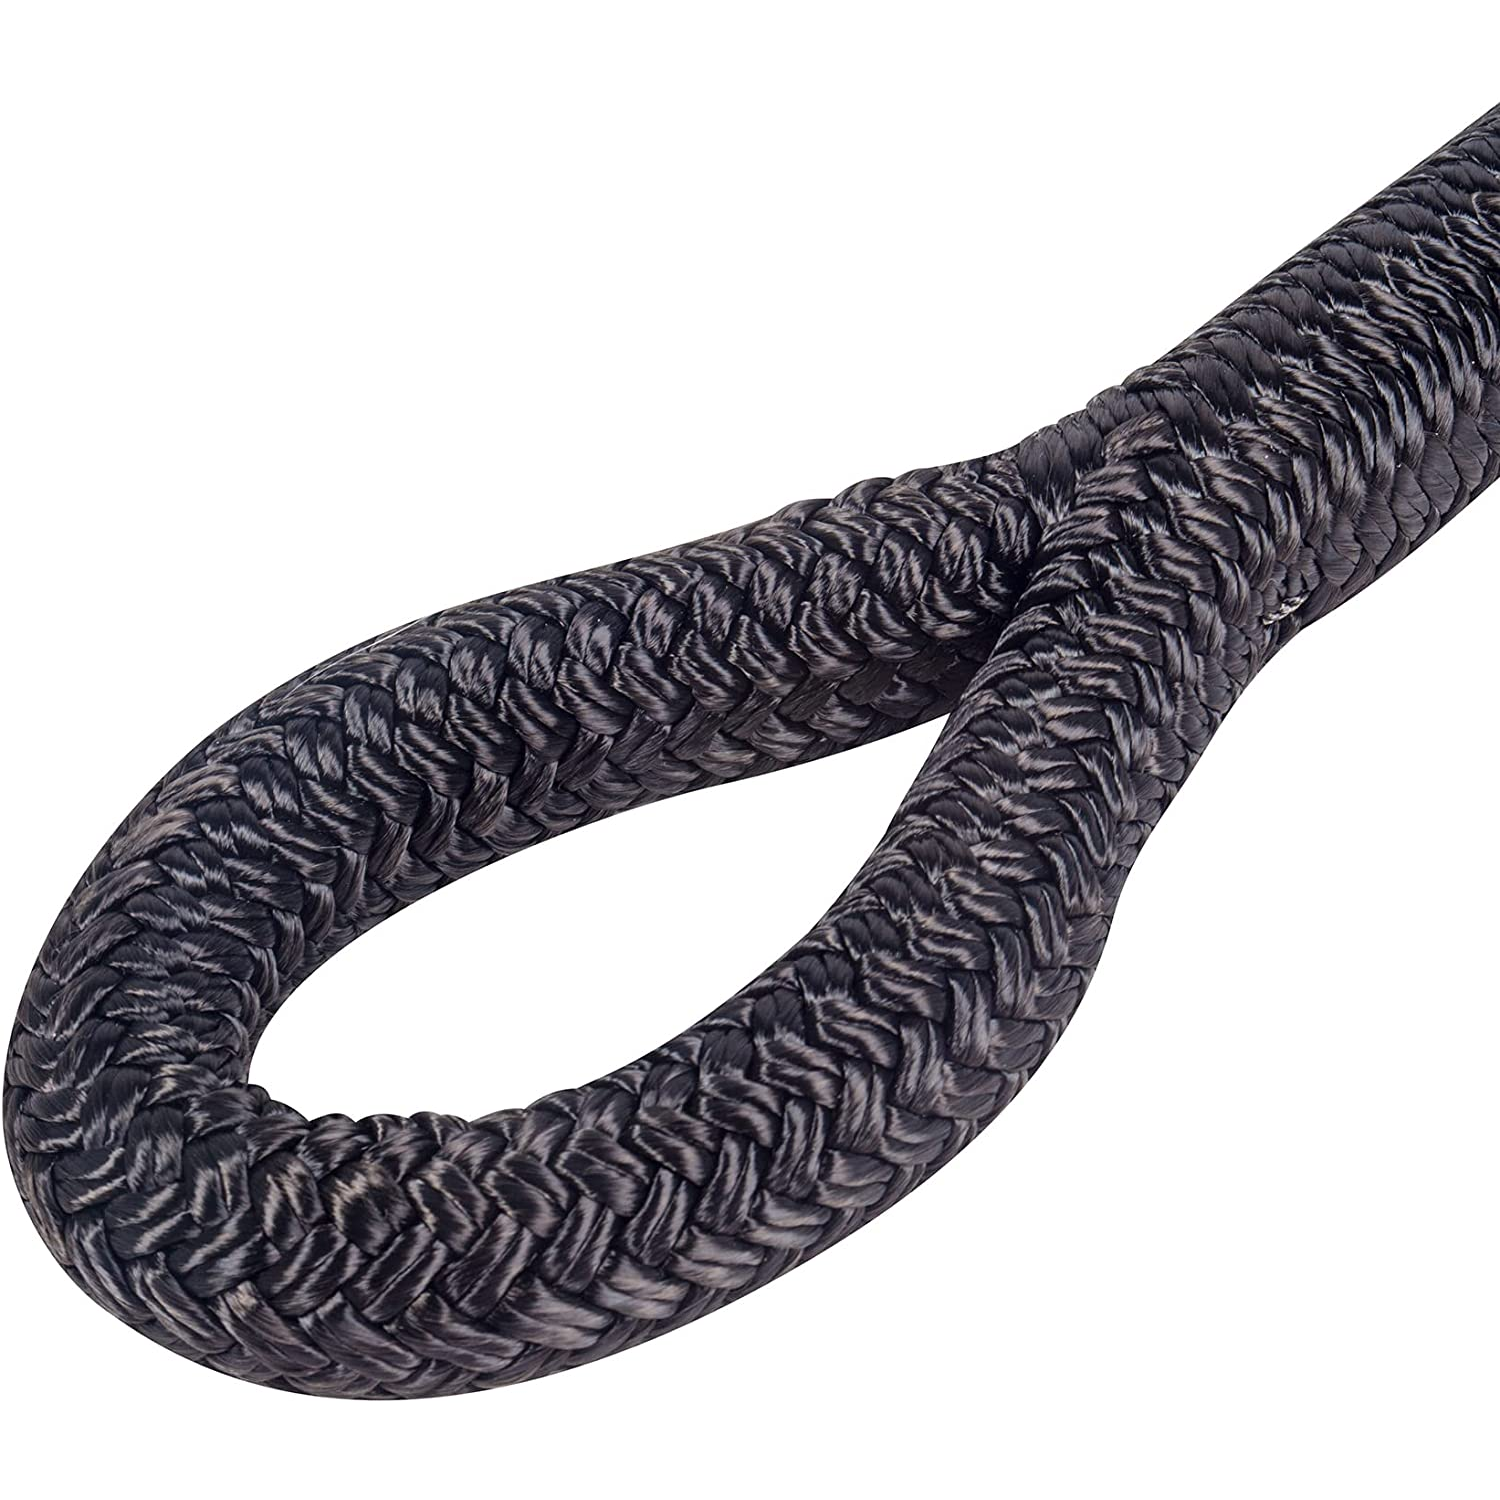 American Lifting Off-Road Kinetic Recovery Rope – Heavy Duty Tow Strap 52,000 Lbs